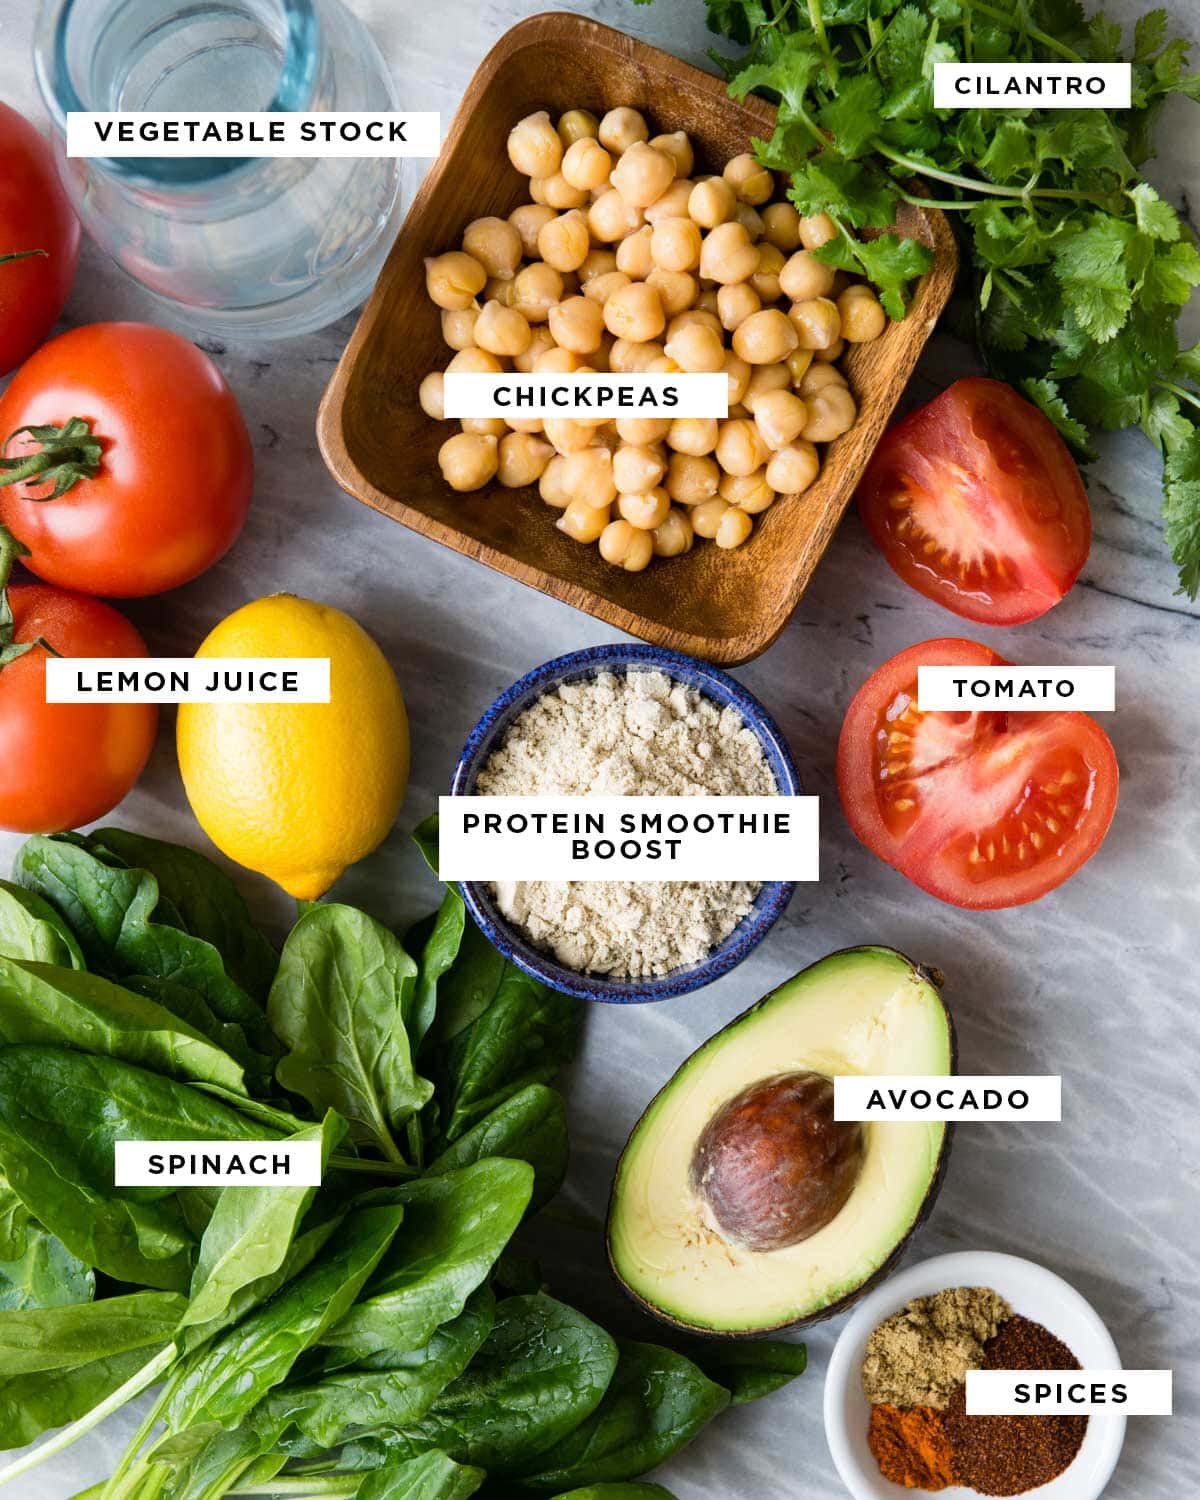 ingredients for a savory smoothie including cilantro, chickpeas, tomato, protein smoothie boost, avocado, spices, spinach, lemon juice and vegetable stock